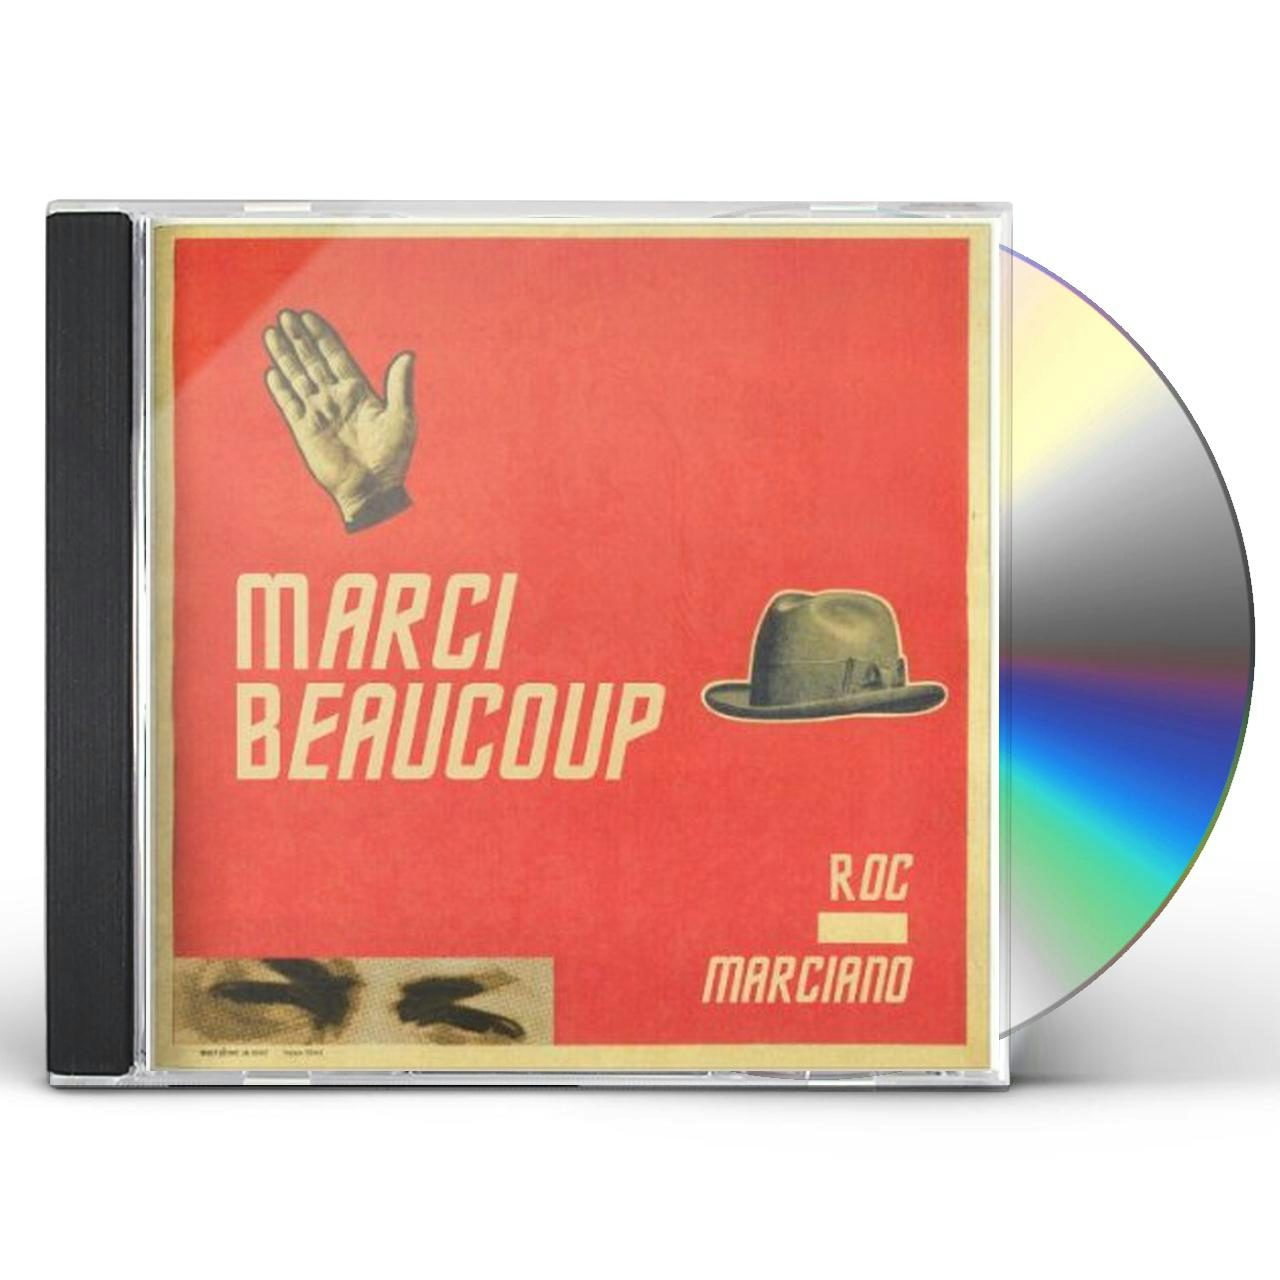 Roc Marciano MARCI BEAUCOUP CD